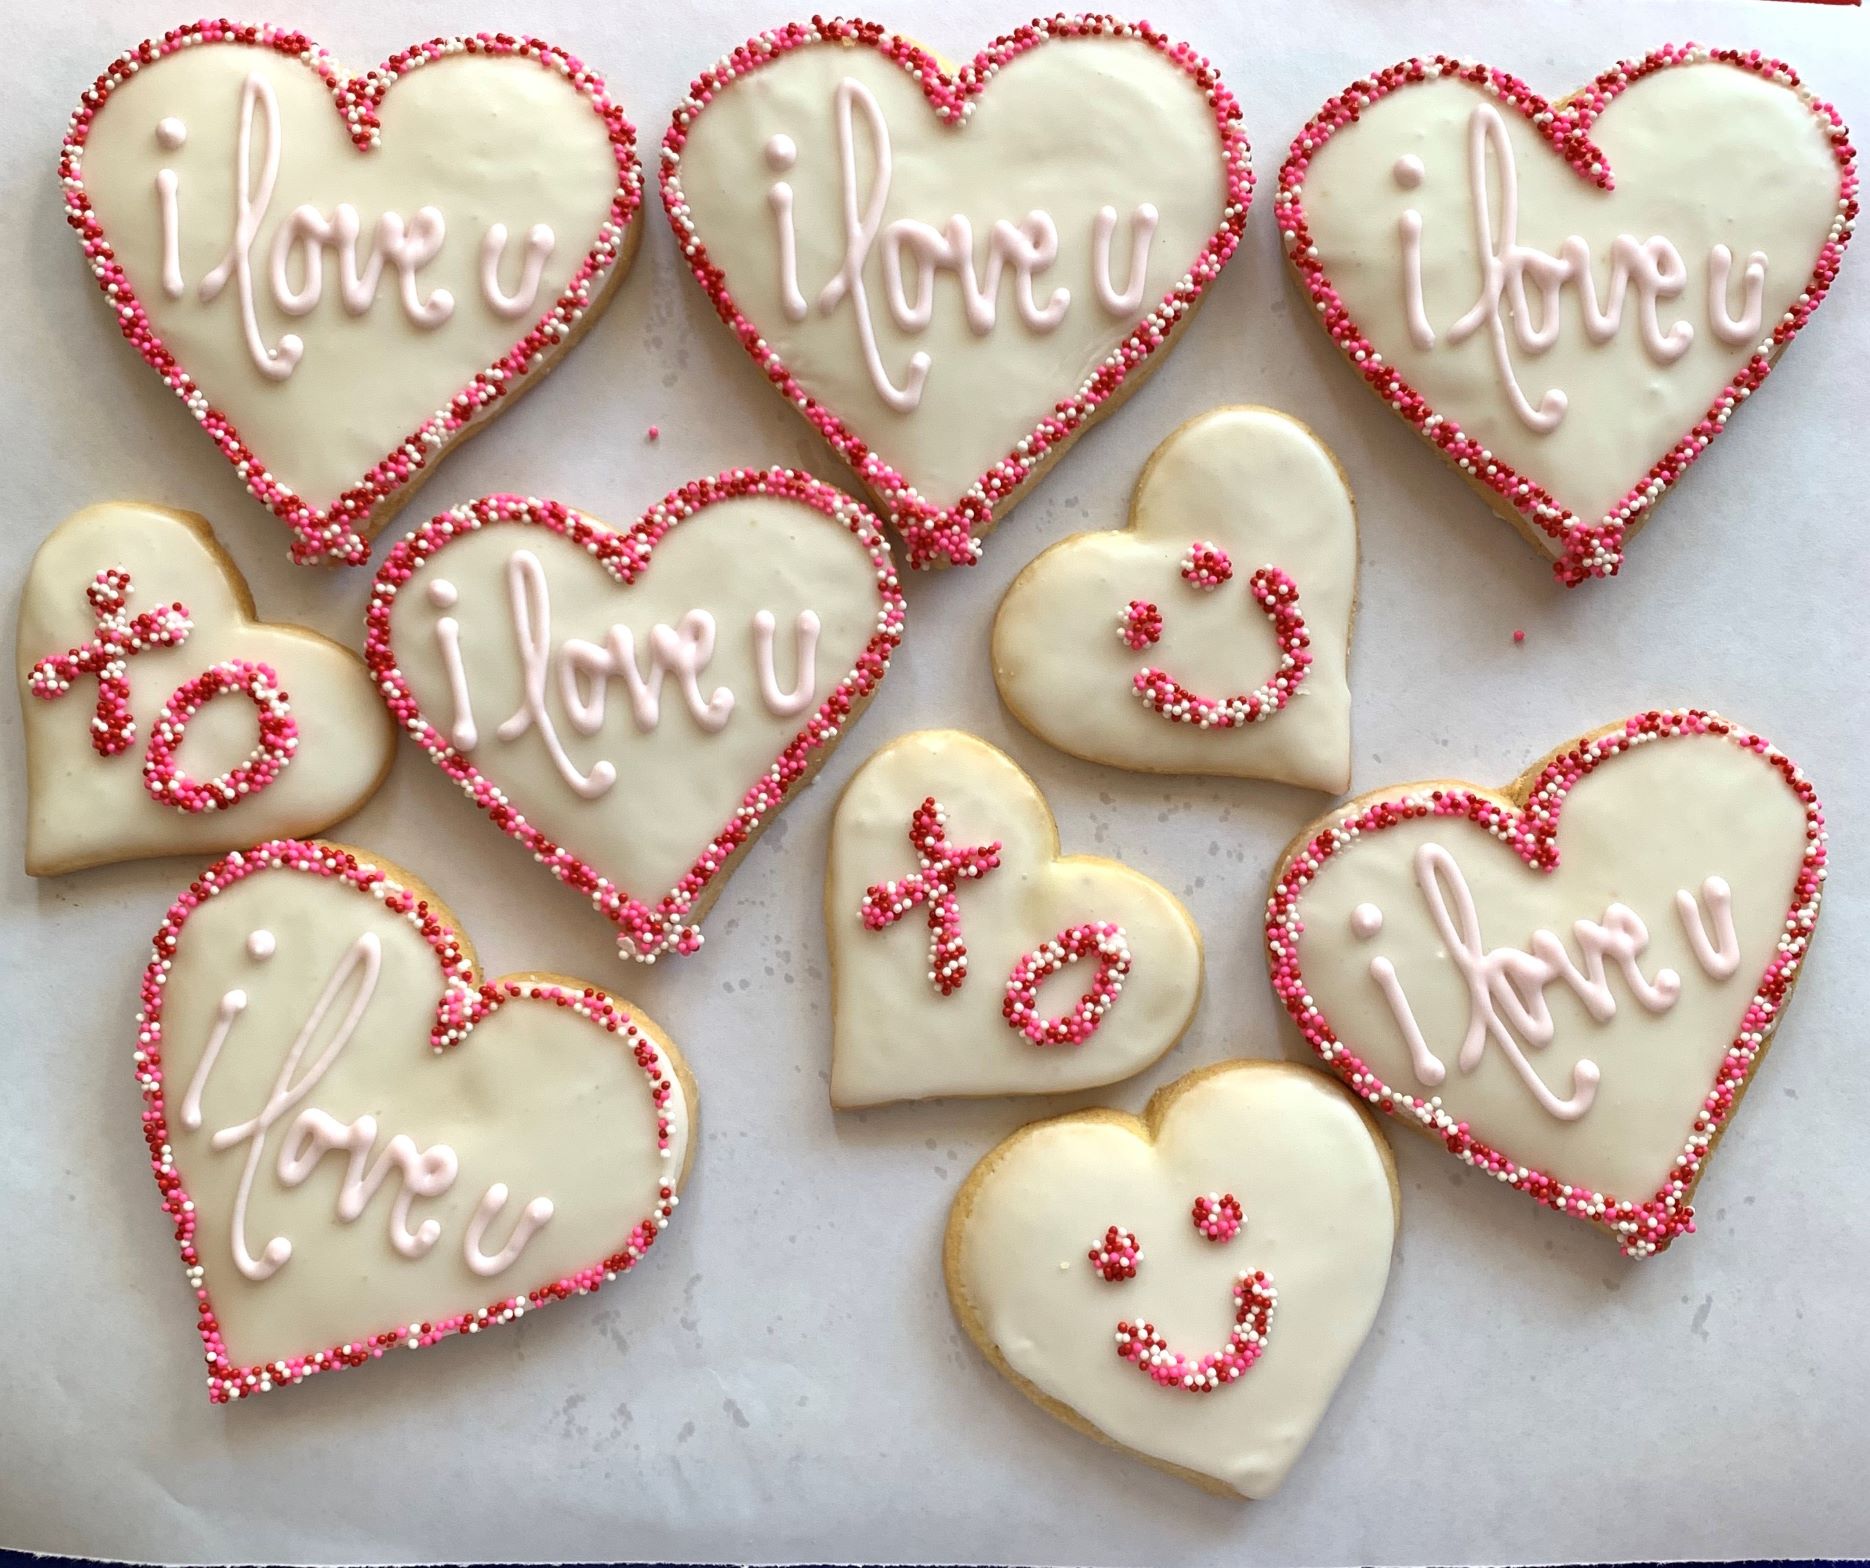 An image of heart-shaped cookies from Little Dom's.